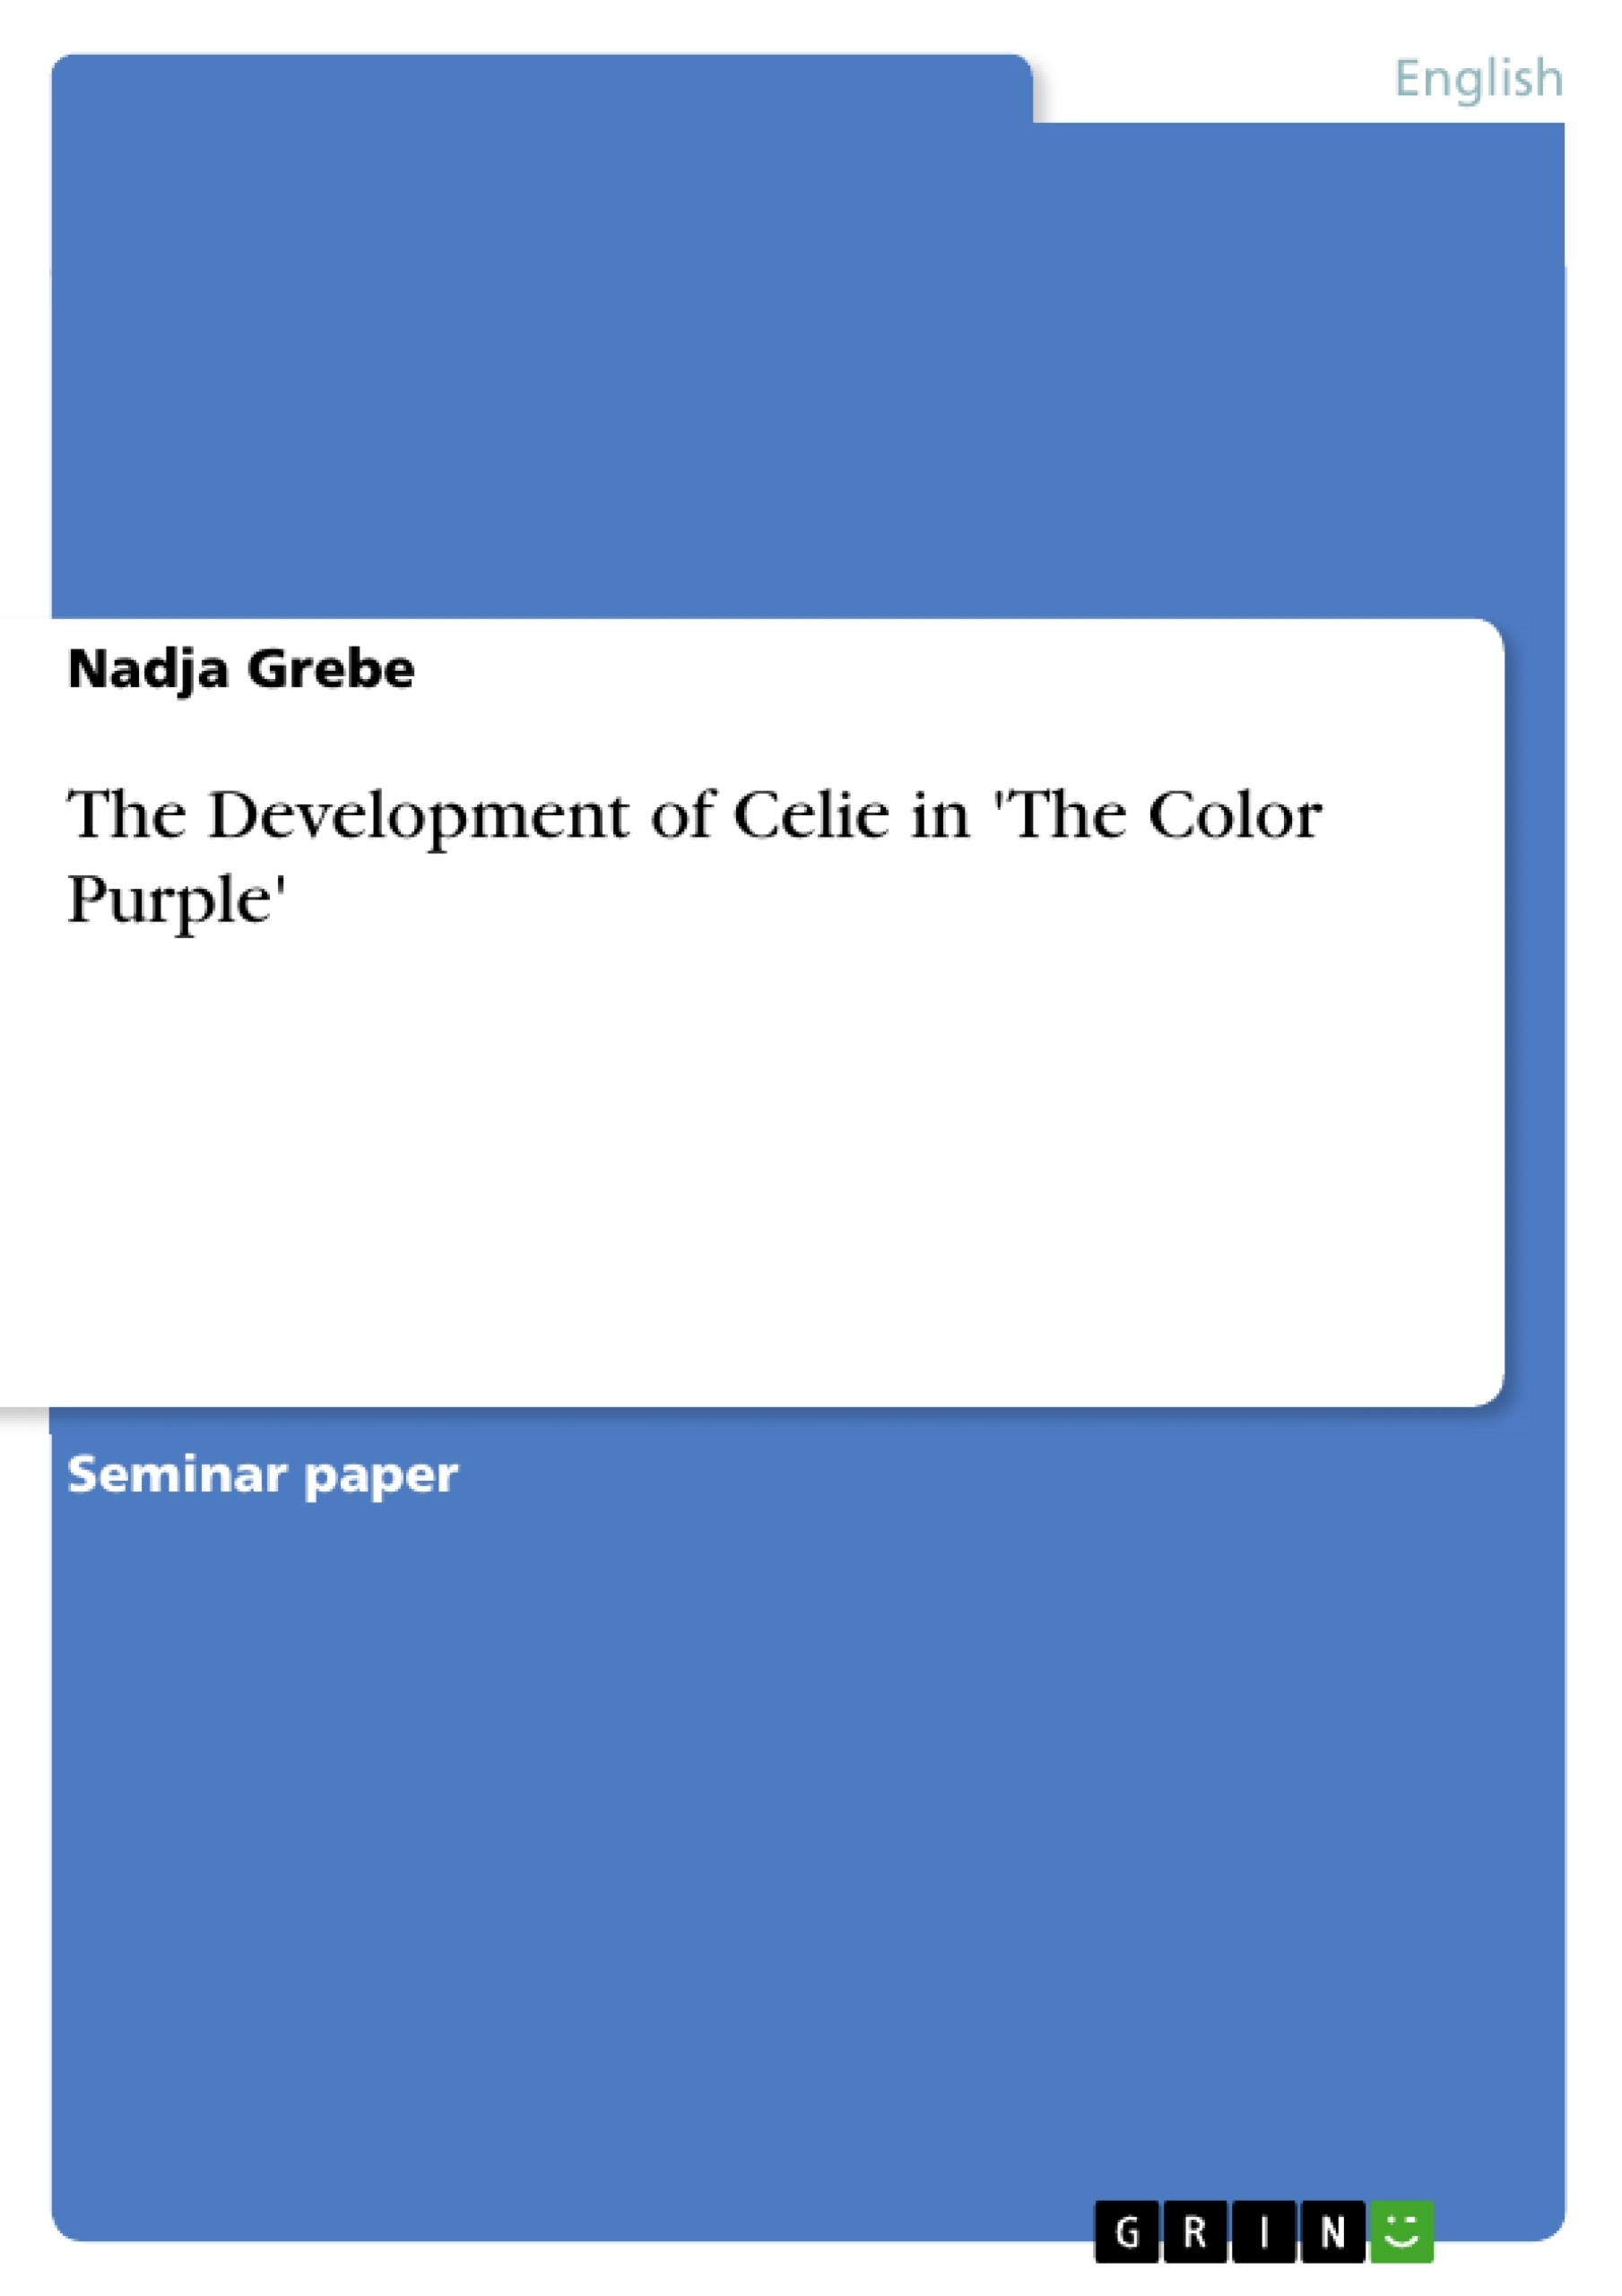 Título: The Development of Celie in 'The Color Purple'